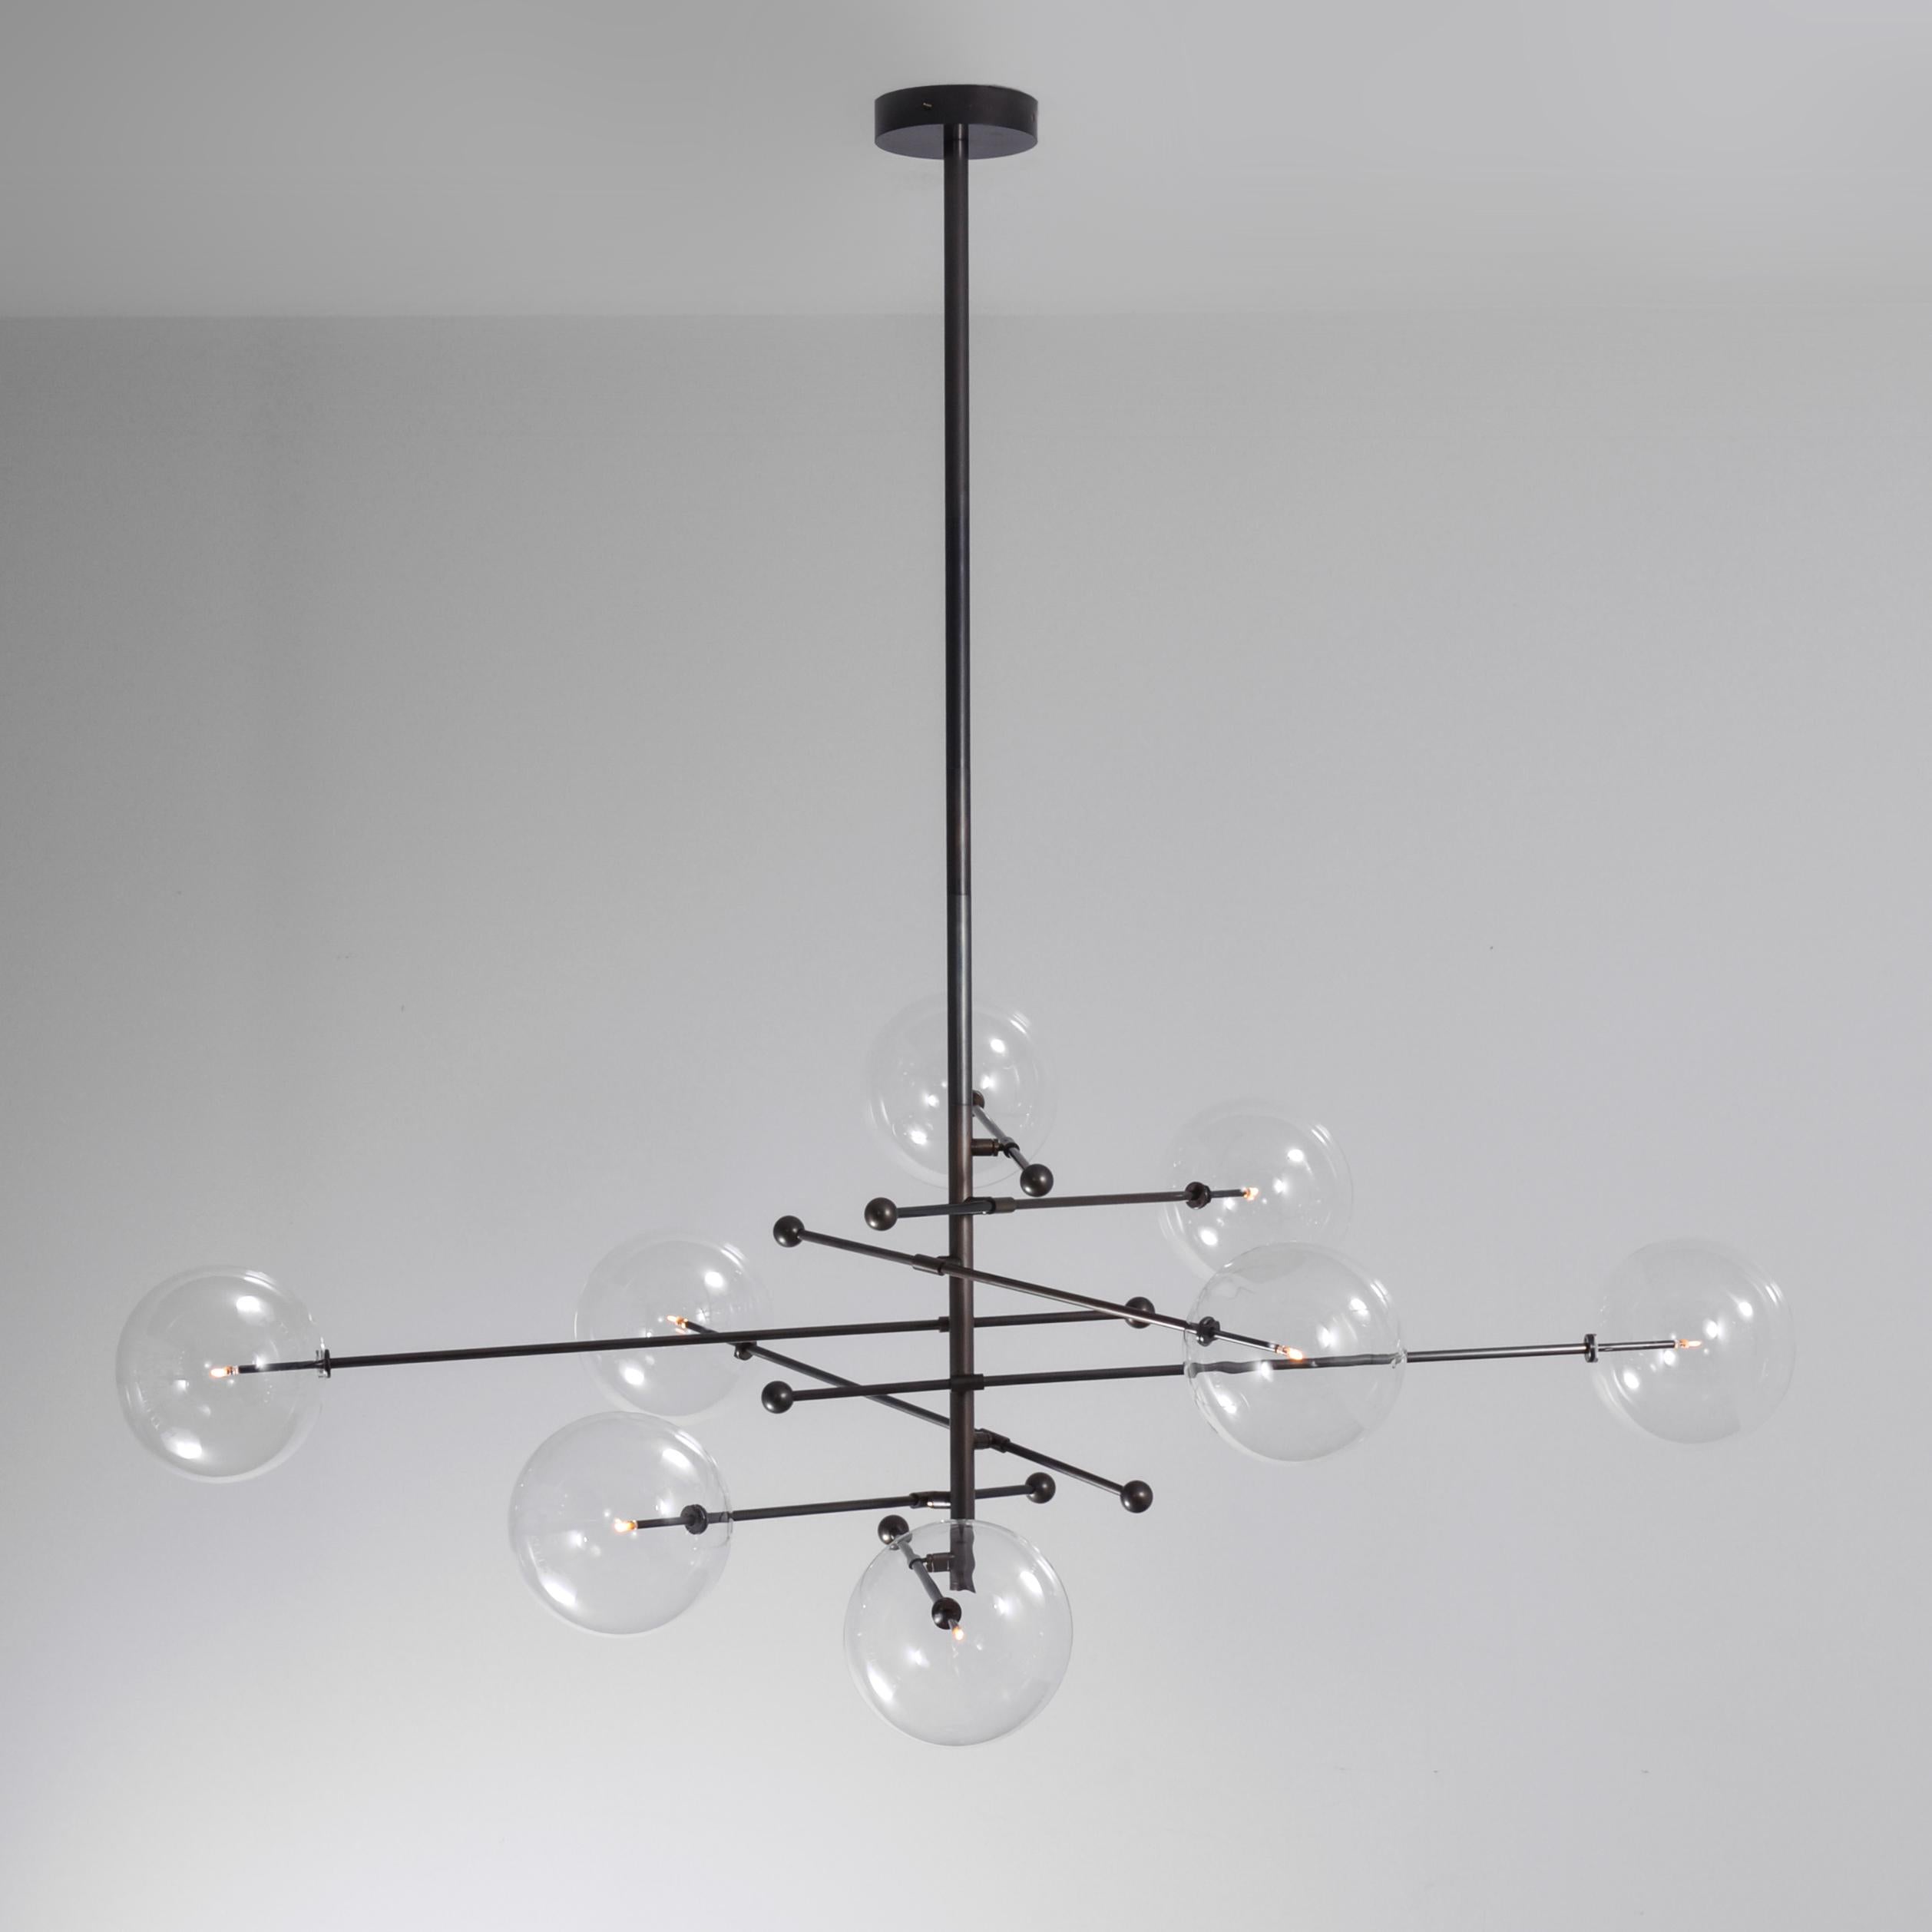 RD15 8 Arms Black Gunmetal Chandelier by Schwung
Dimensions: Diameter 200.3 x H 180 cm 
Materials: Solid brass, hand-blown glass globes
Finish: Black Gunmetal. 
Also available in finishes: Natural Brass or Polished Nickel. 
All our lamps can be